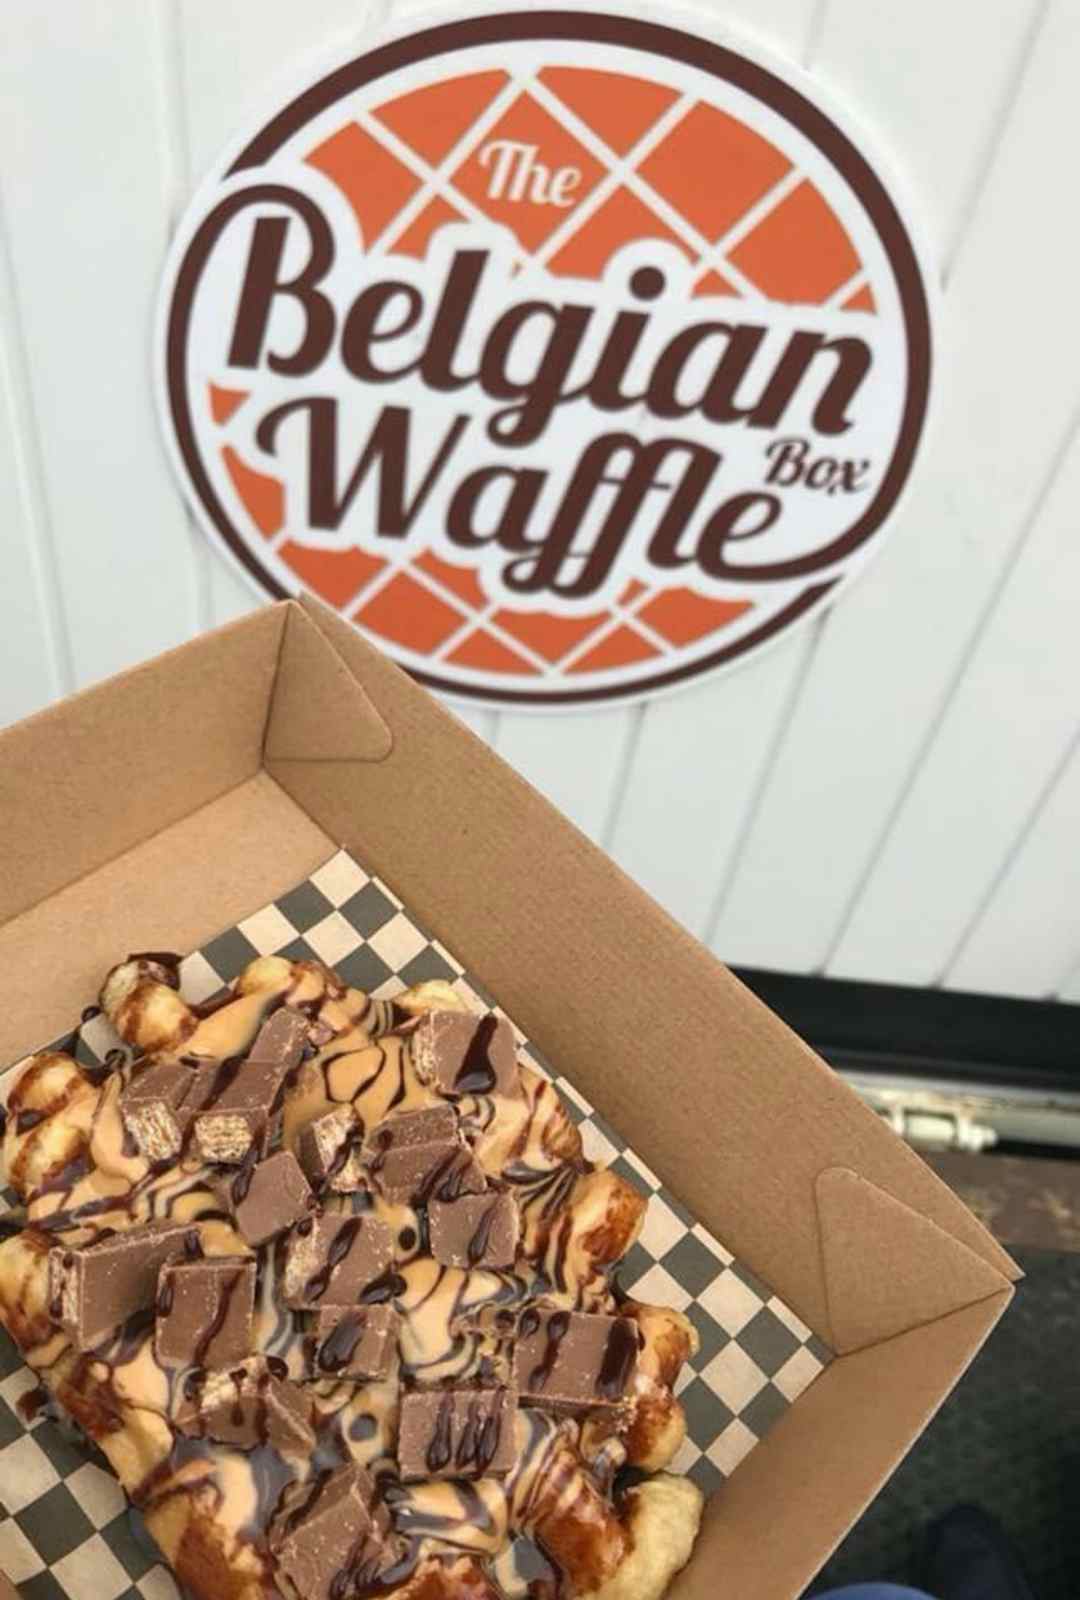 Hero image for supplier The Belgian Waffle Box